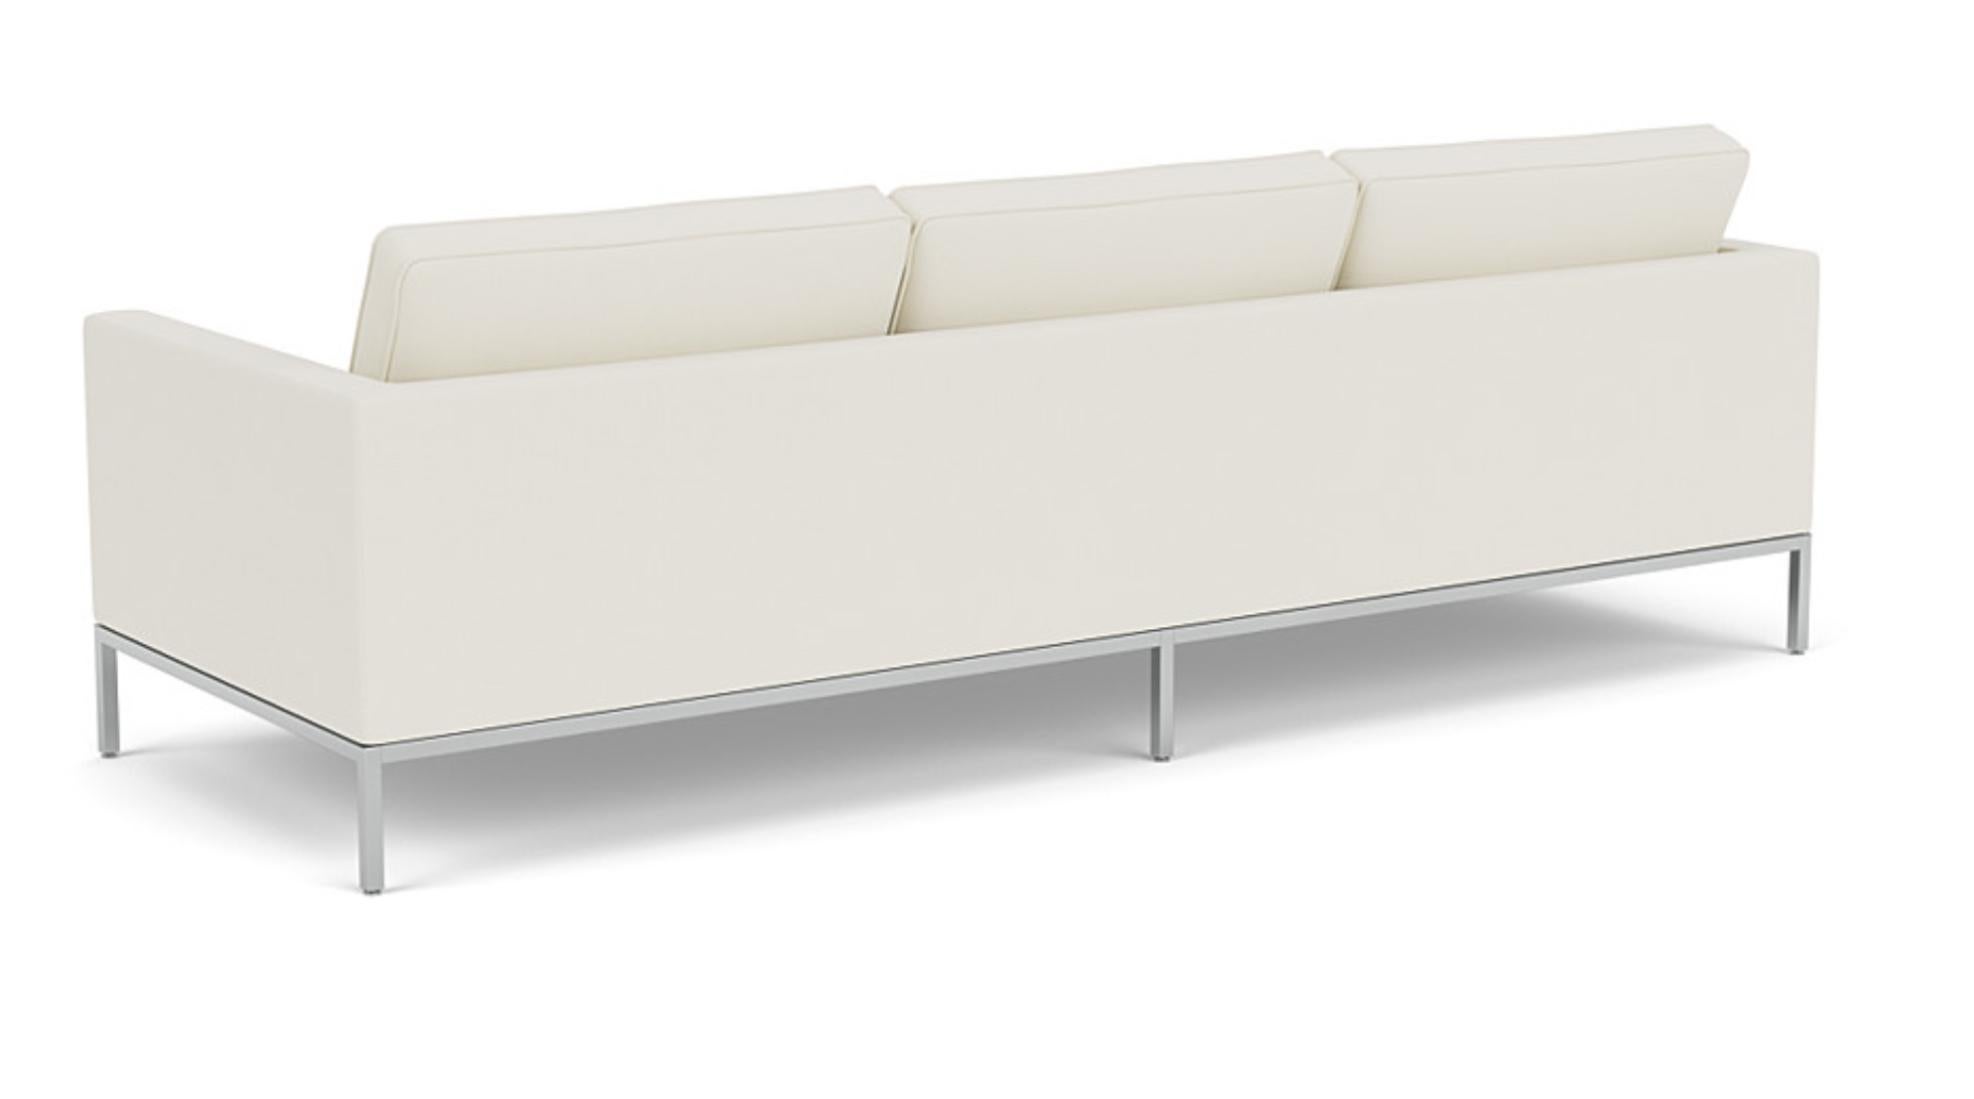 Florence Knoll for Knoll Original Tufted 3-Seat Sofa Cream White, USA 1954-2000s. Warmed through color and texture, the Florence Knoll Sofa is a scaled-down translation of the rhythm and proportions of mid-century modern architecture. With a spare,